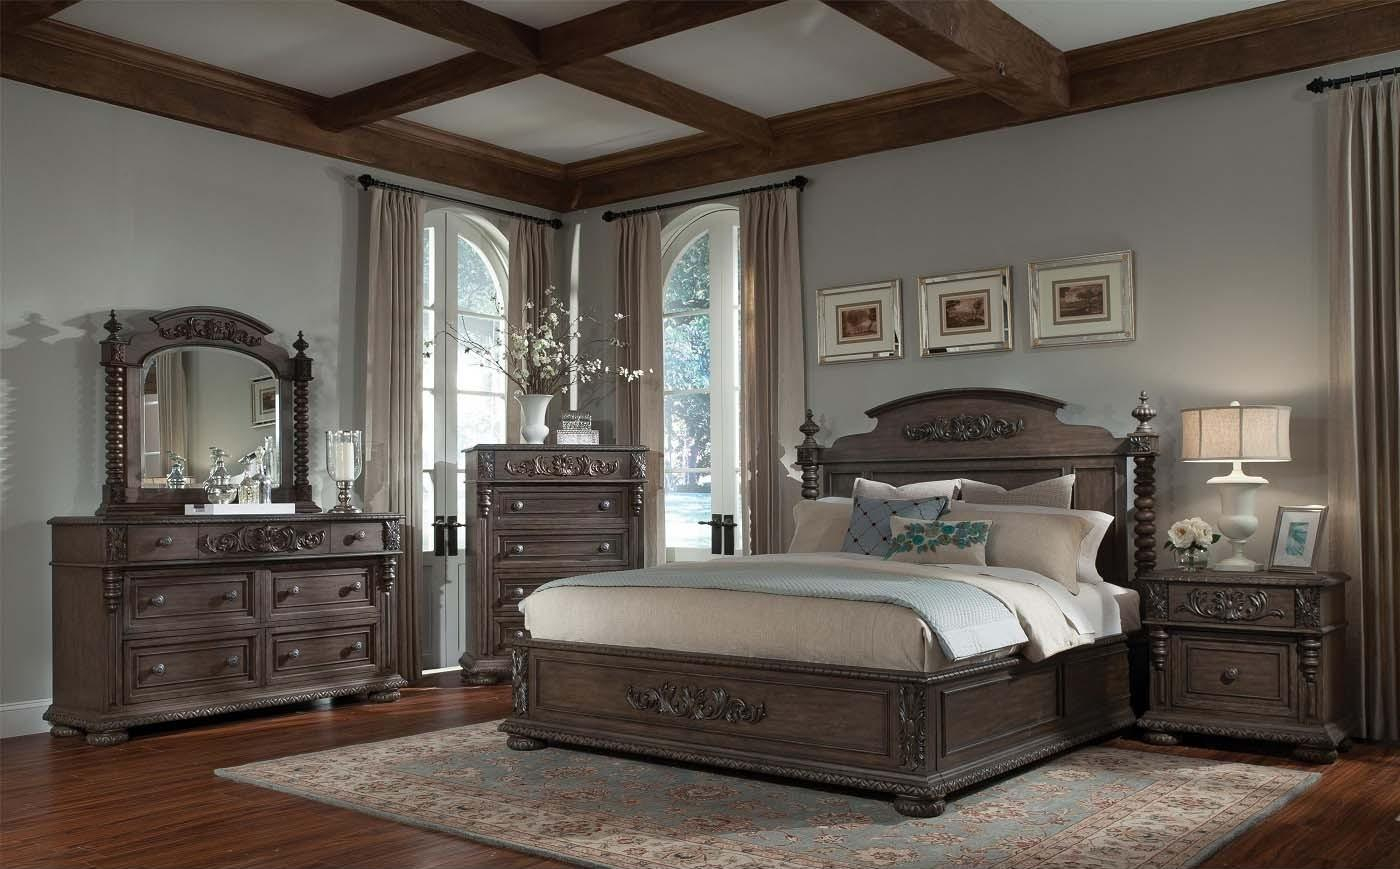 Klaussner Versailles 6 Piece King Size Bedroom Set throughout dimensions 1400 X 869